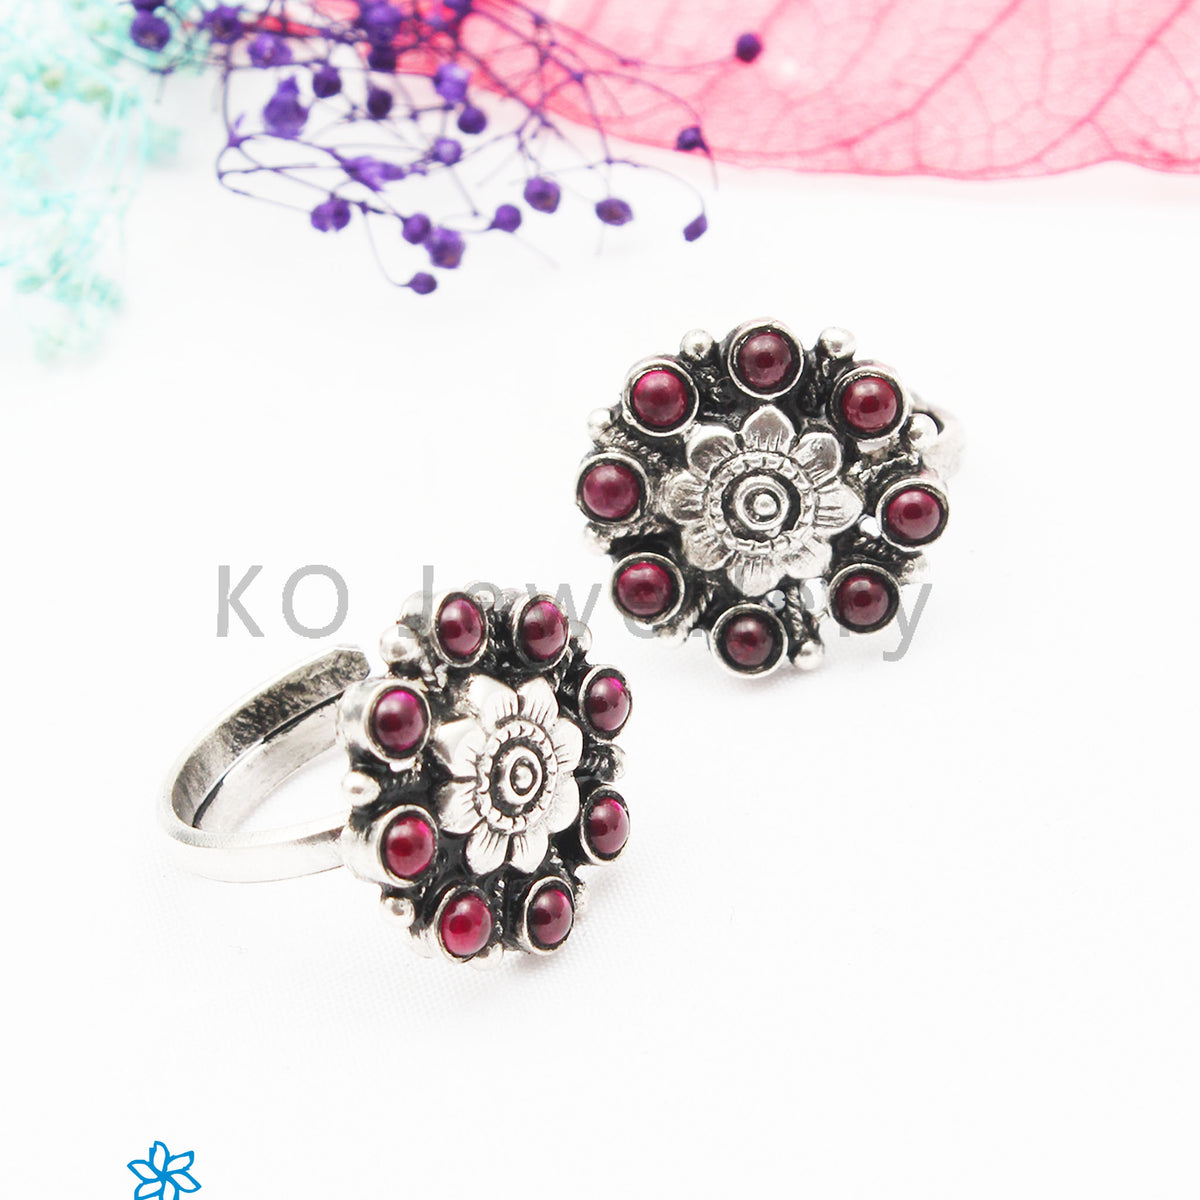 Antique Finish Silver Toe Ring | Buy silver Toe Rings online at rinayra.com